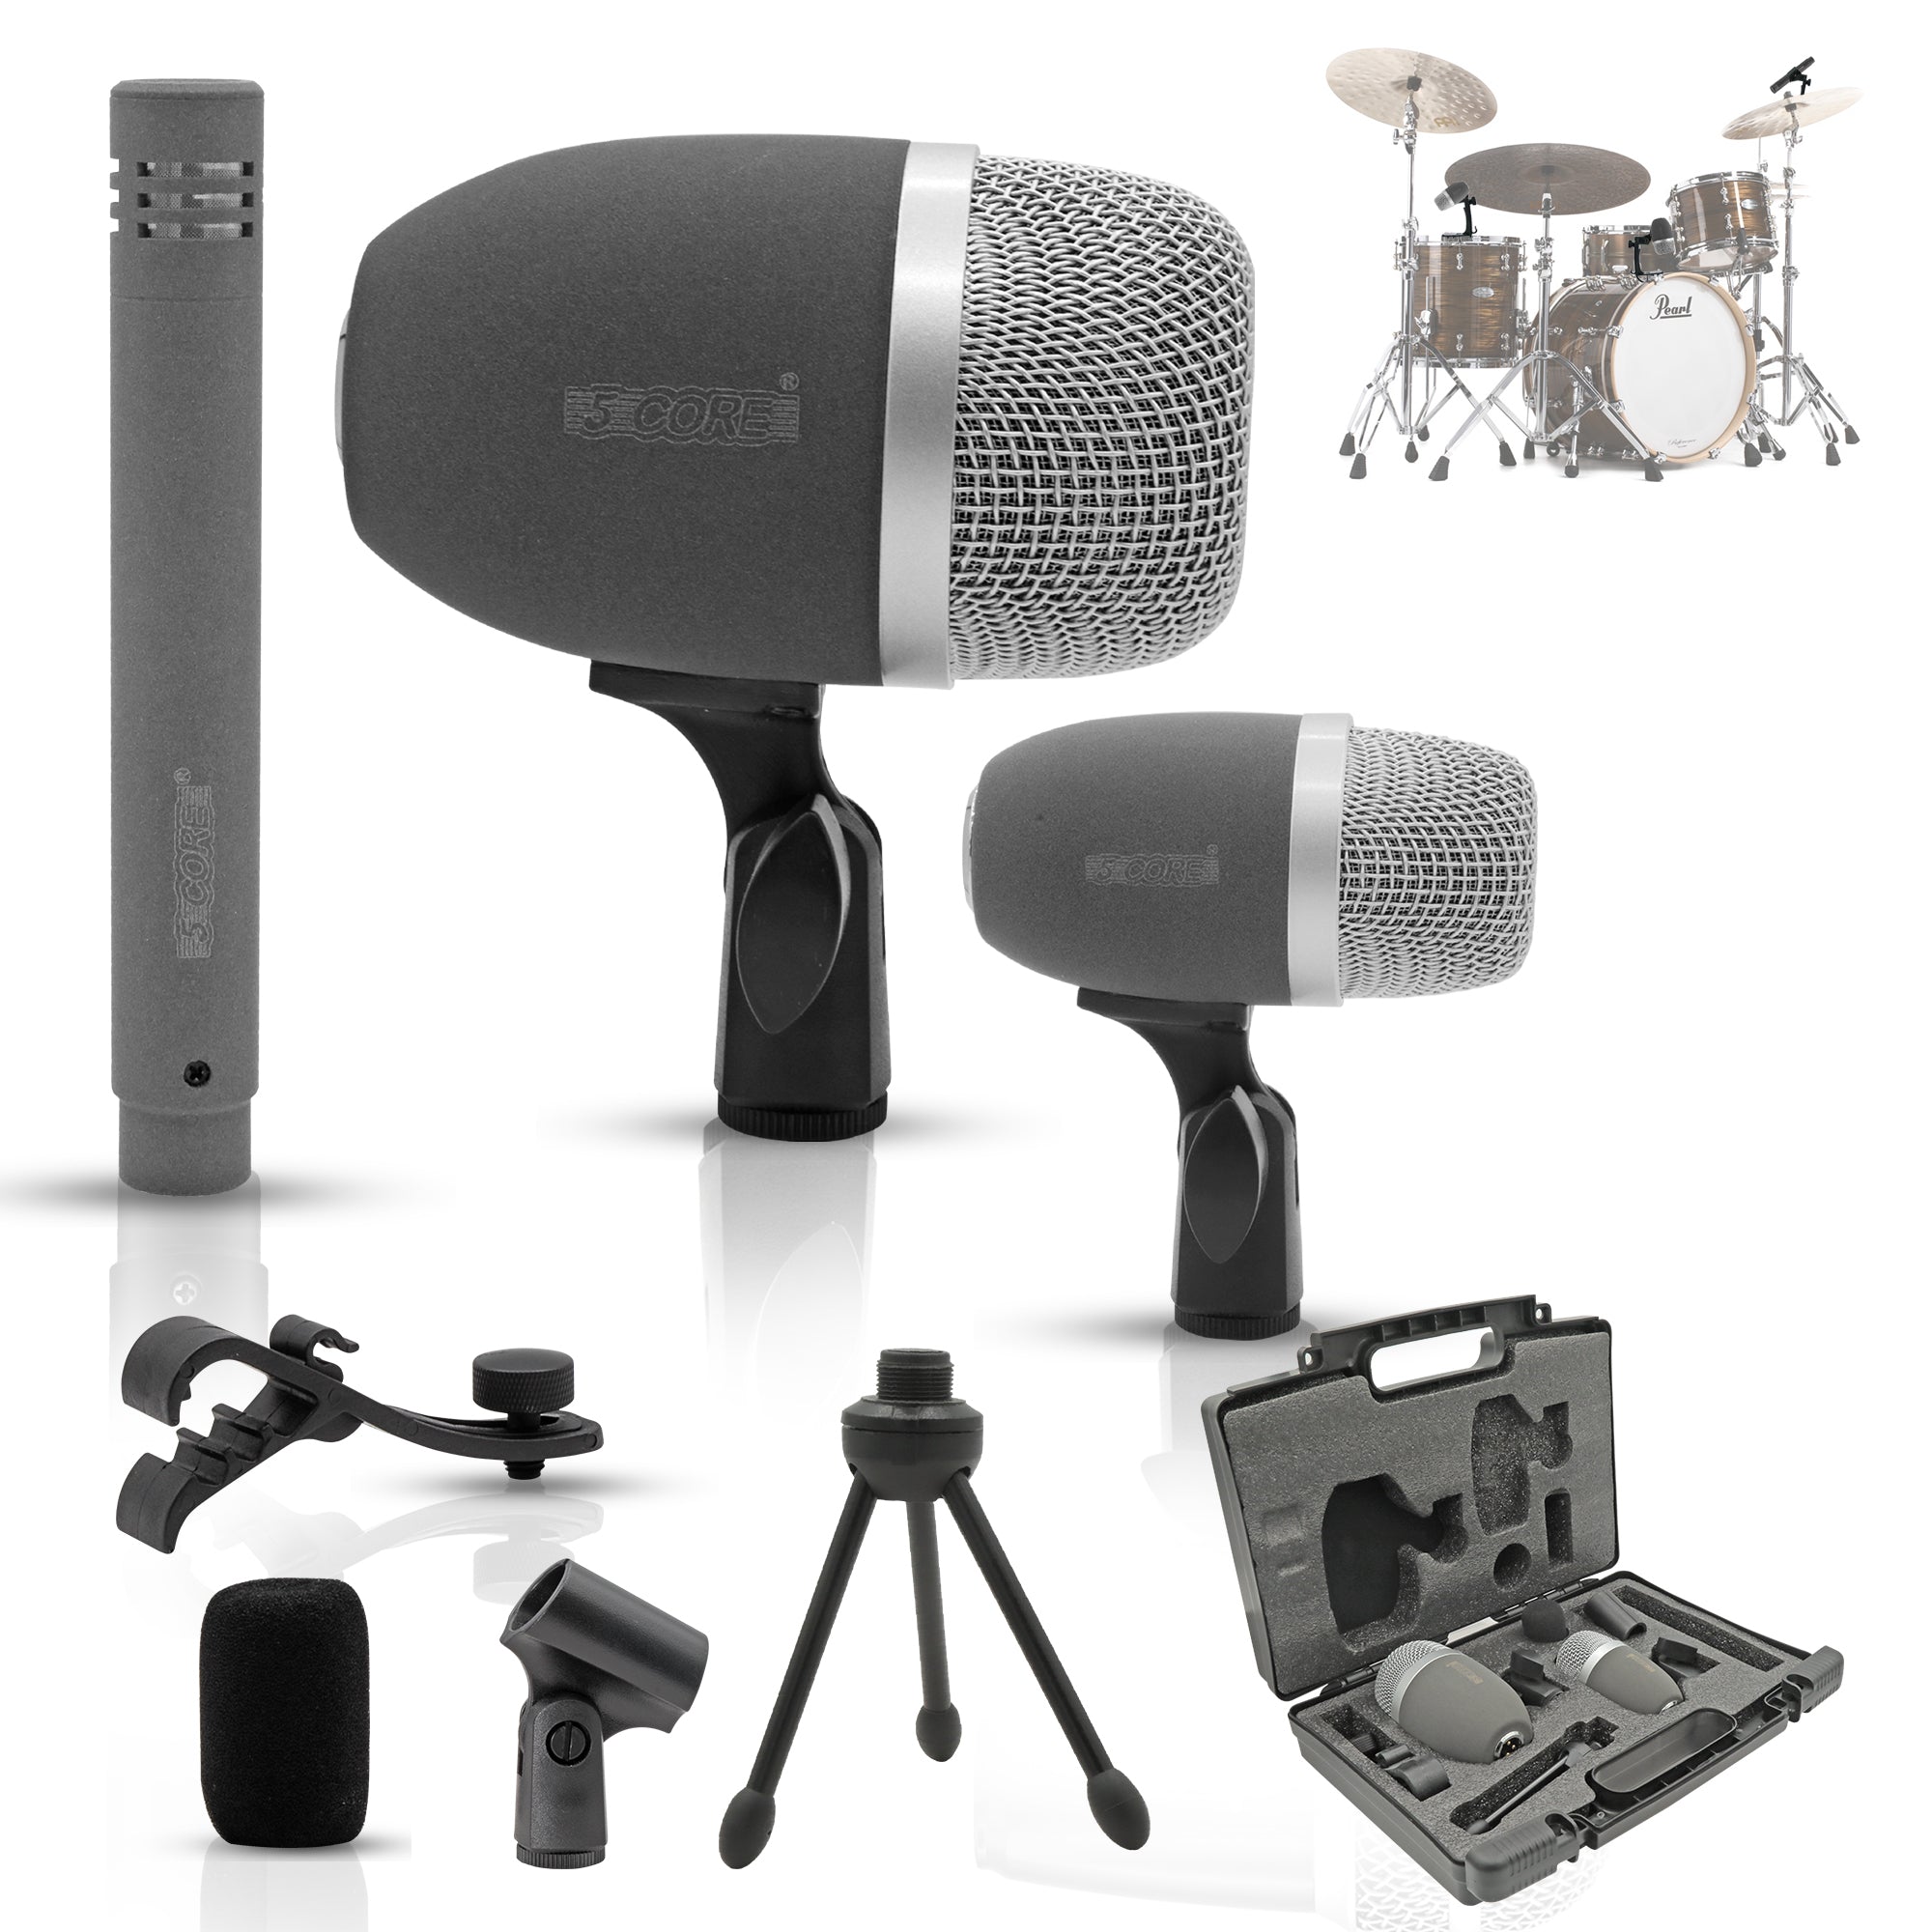 5 Core Drum Microphone Kit 3 Pieces Drumming Mics Full Metal Wired Dynamic Instrument Mic Set for Bass Tom Snare Cymbals - DM 7XP